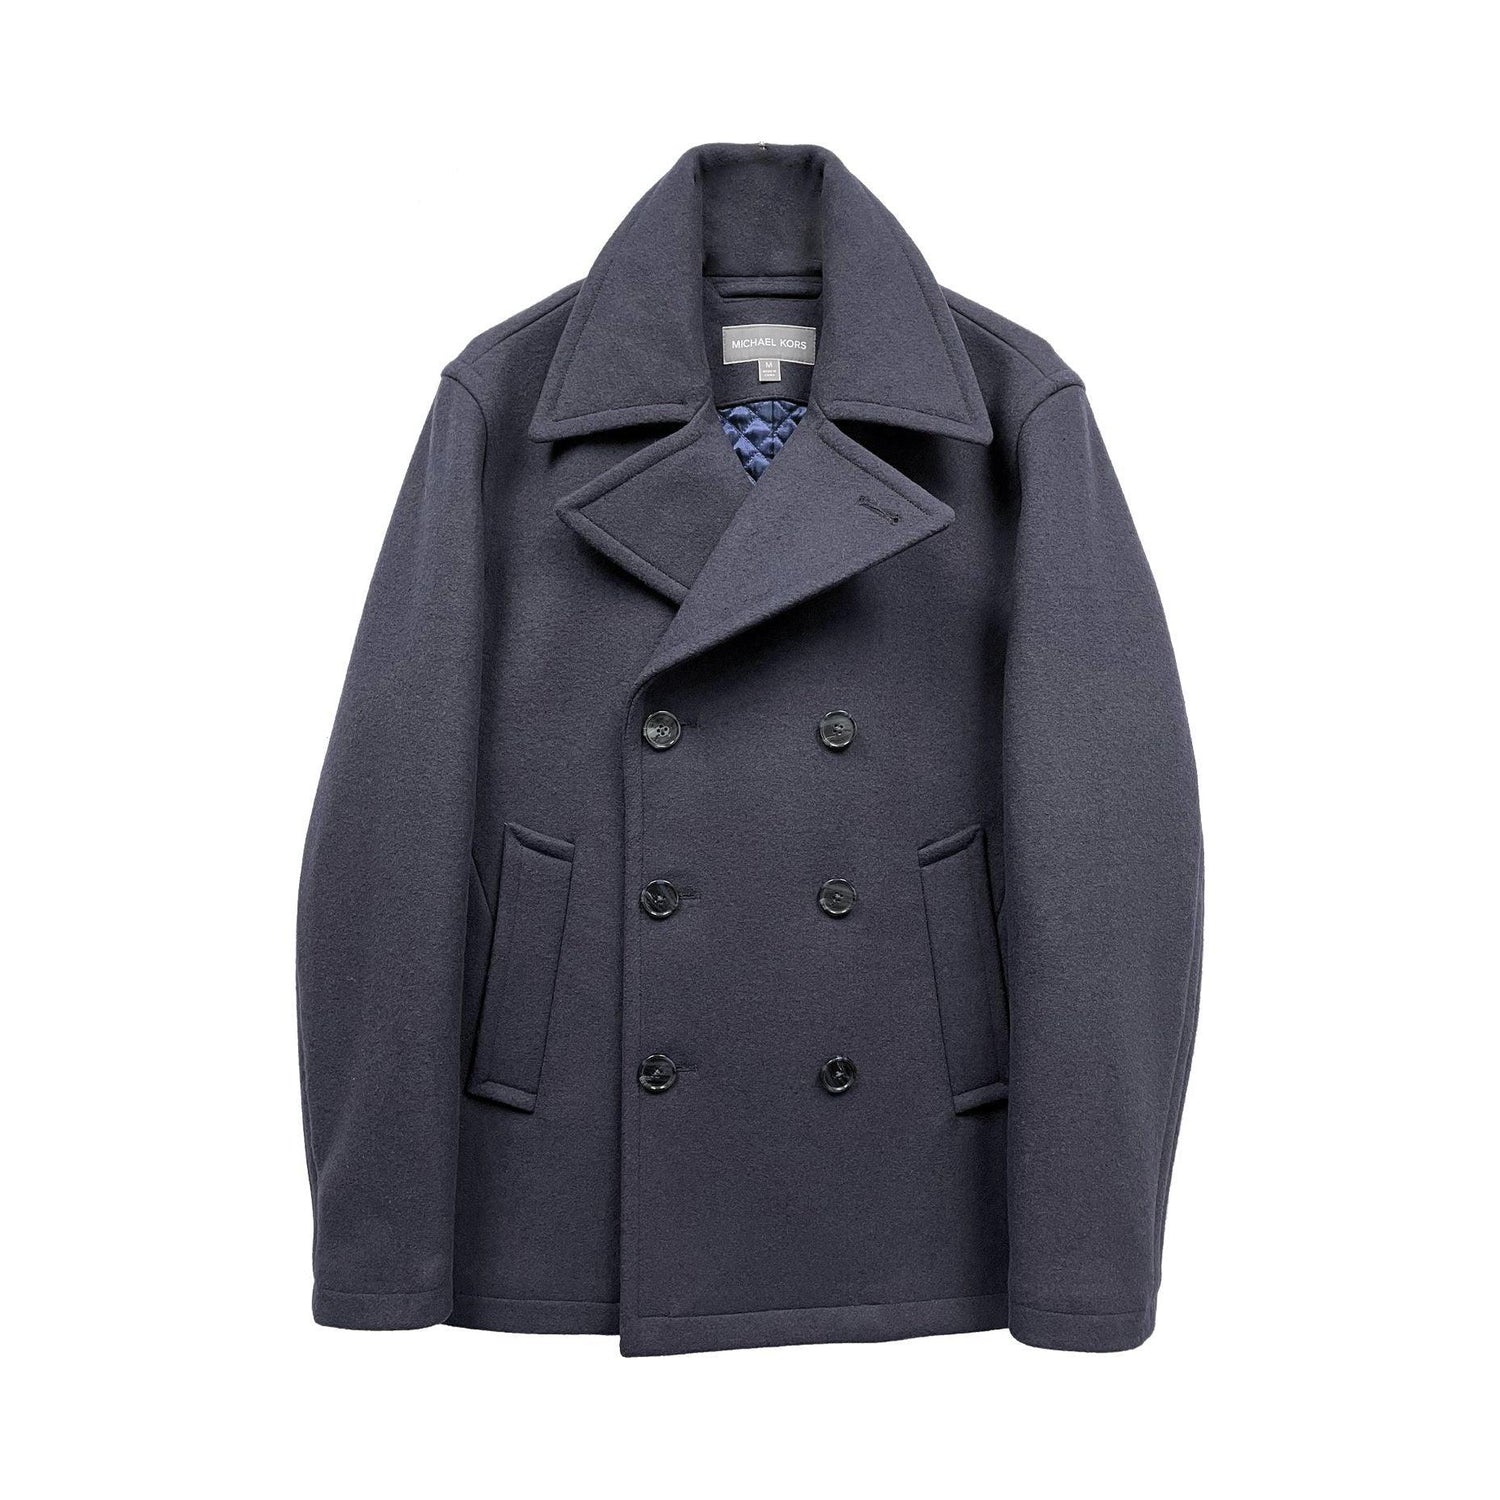 Michael Kors Men's Double Breasted Wool Peacoat - Zooloo Leather